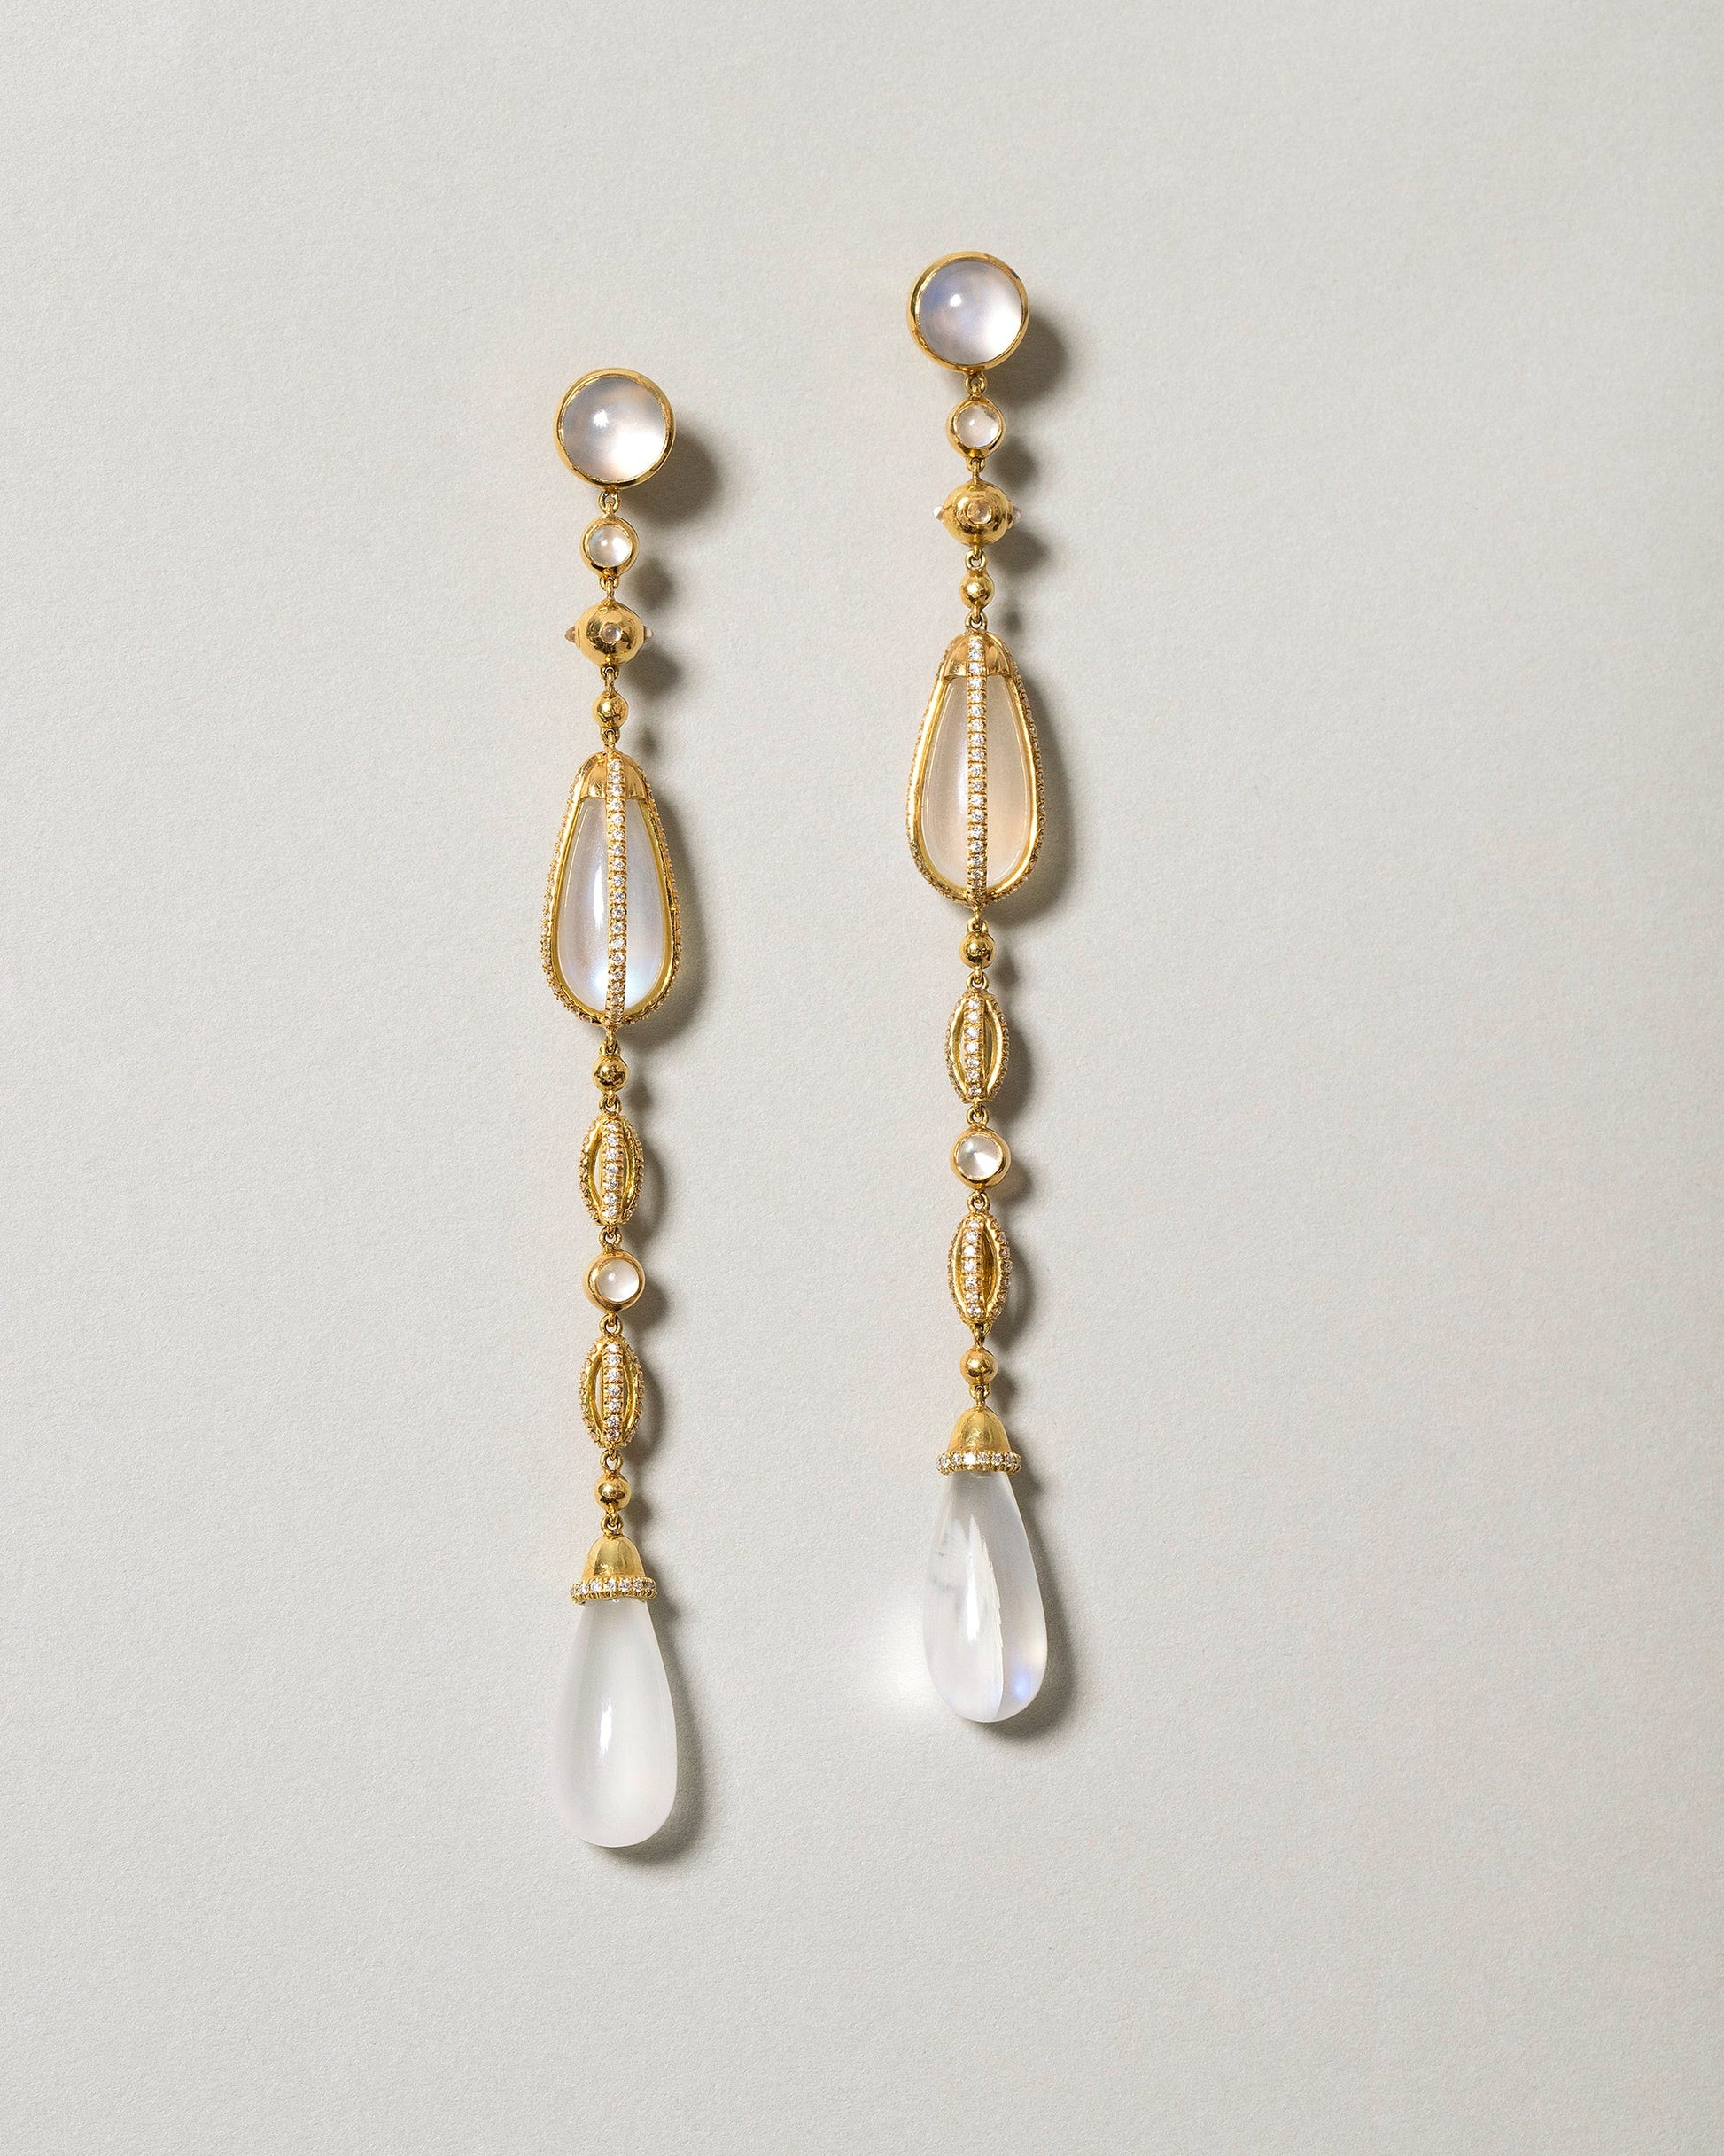  The Future Moonstone Drop Earrings on light color background.